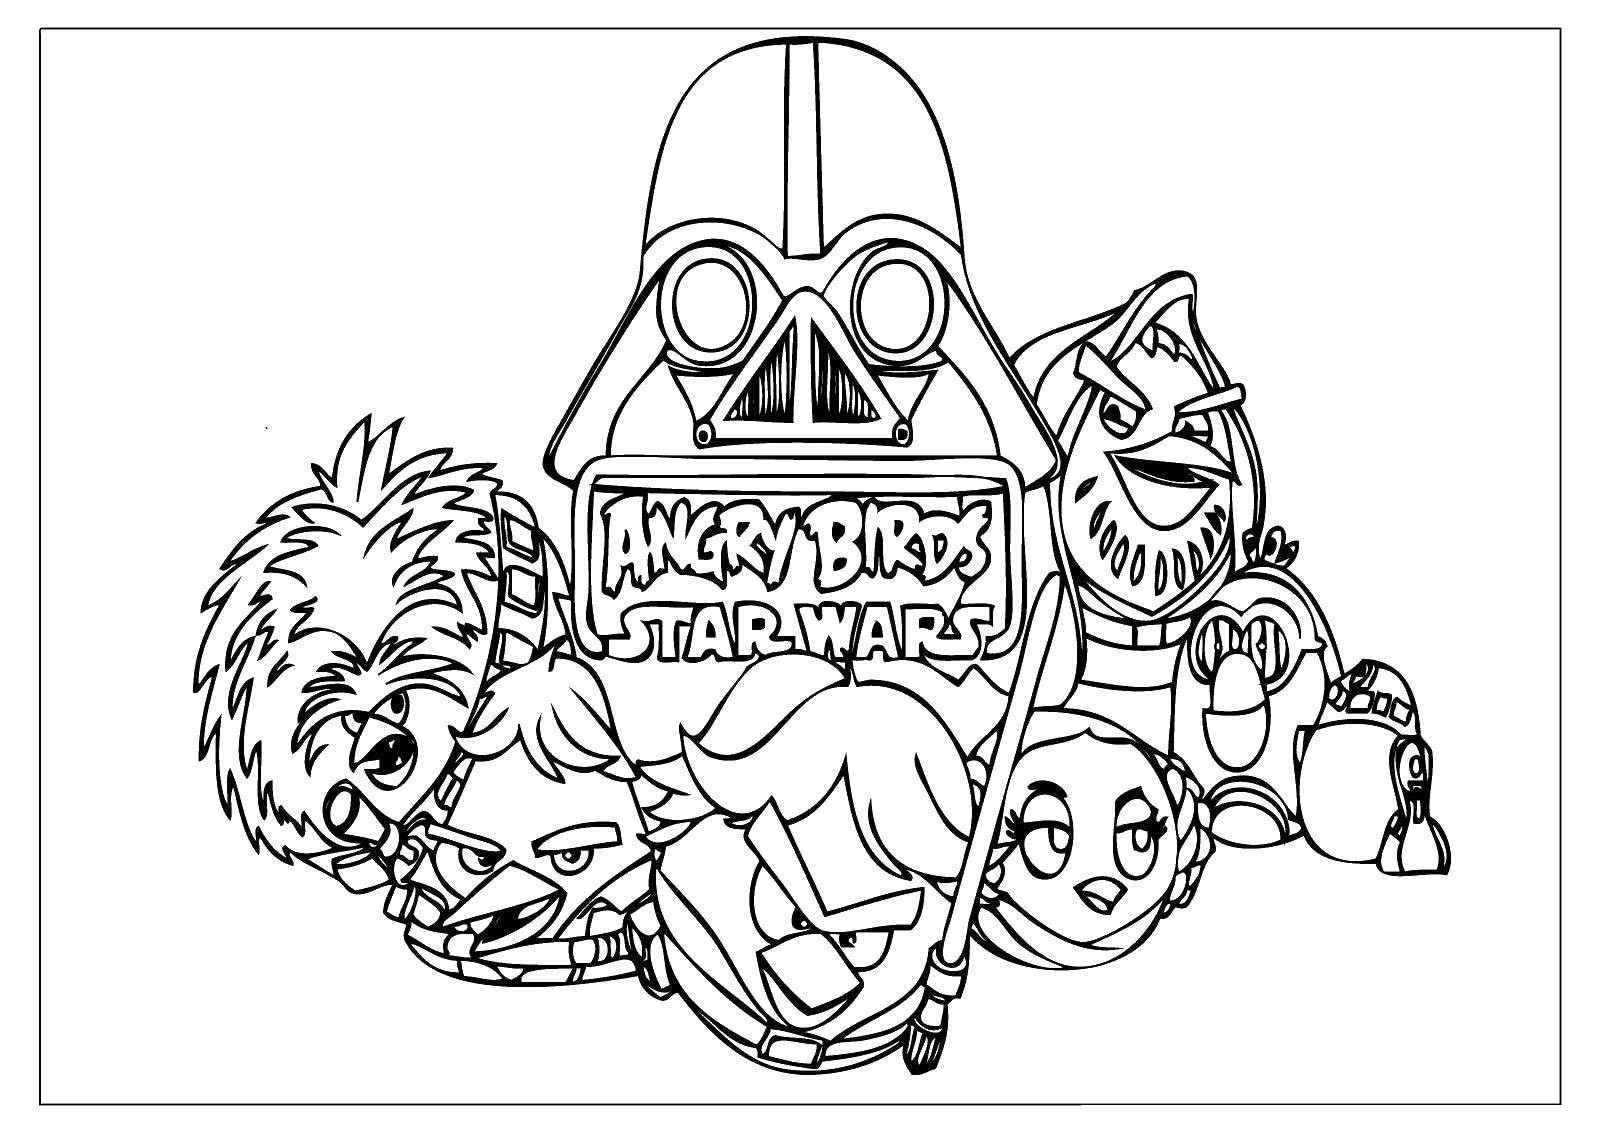 Coloring Star wars and angry birds. Category angry birds. Tags:  angry birds, bird.